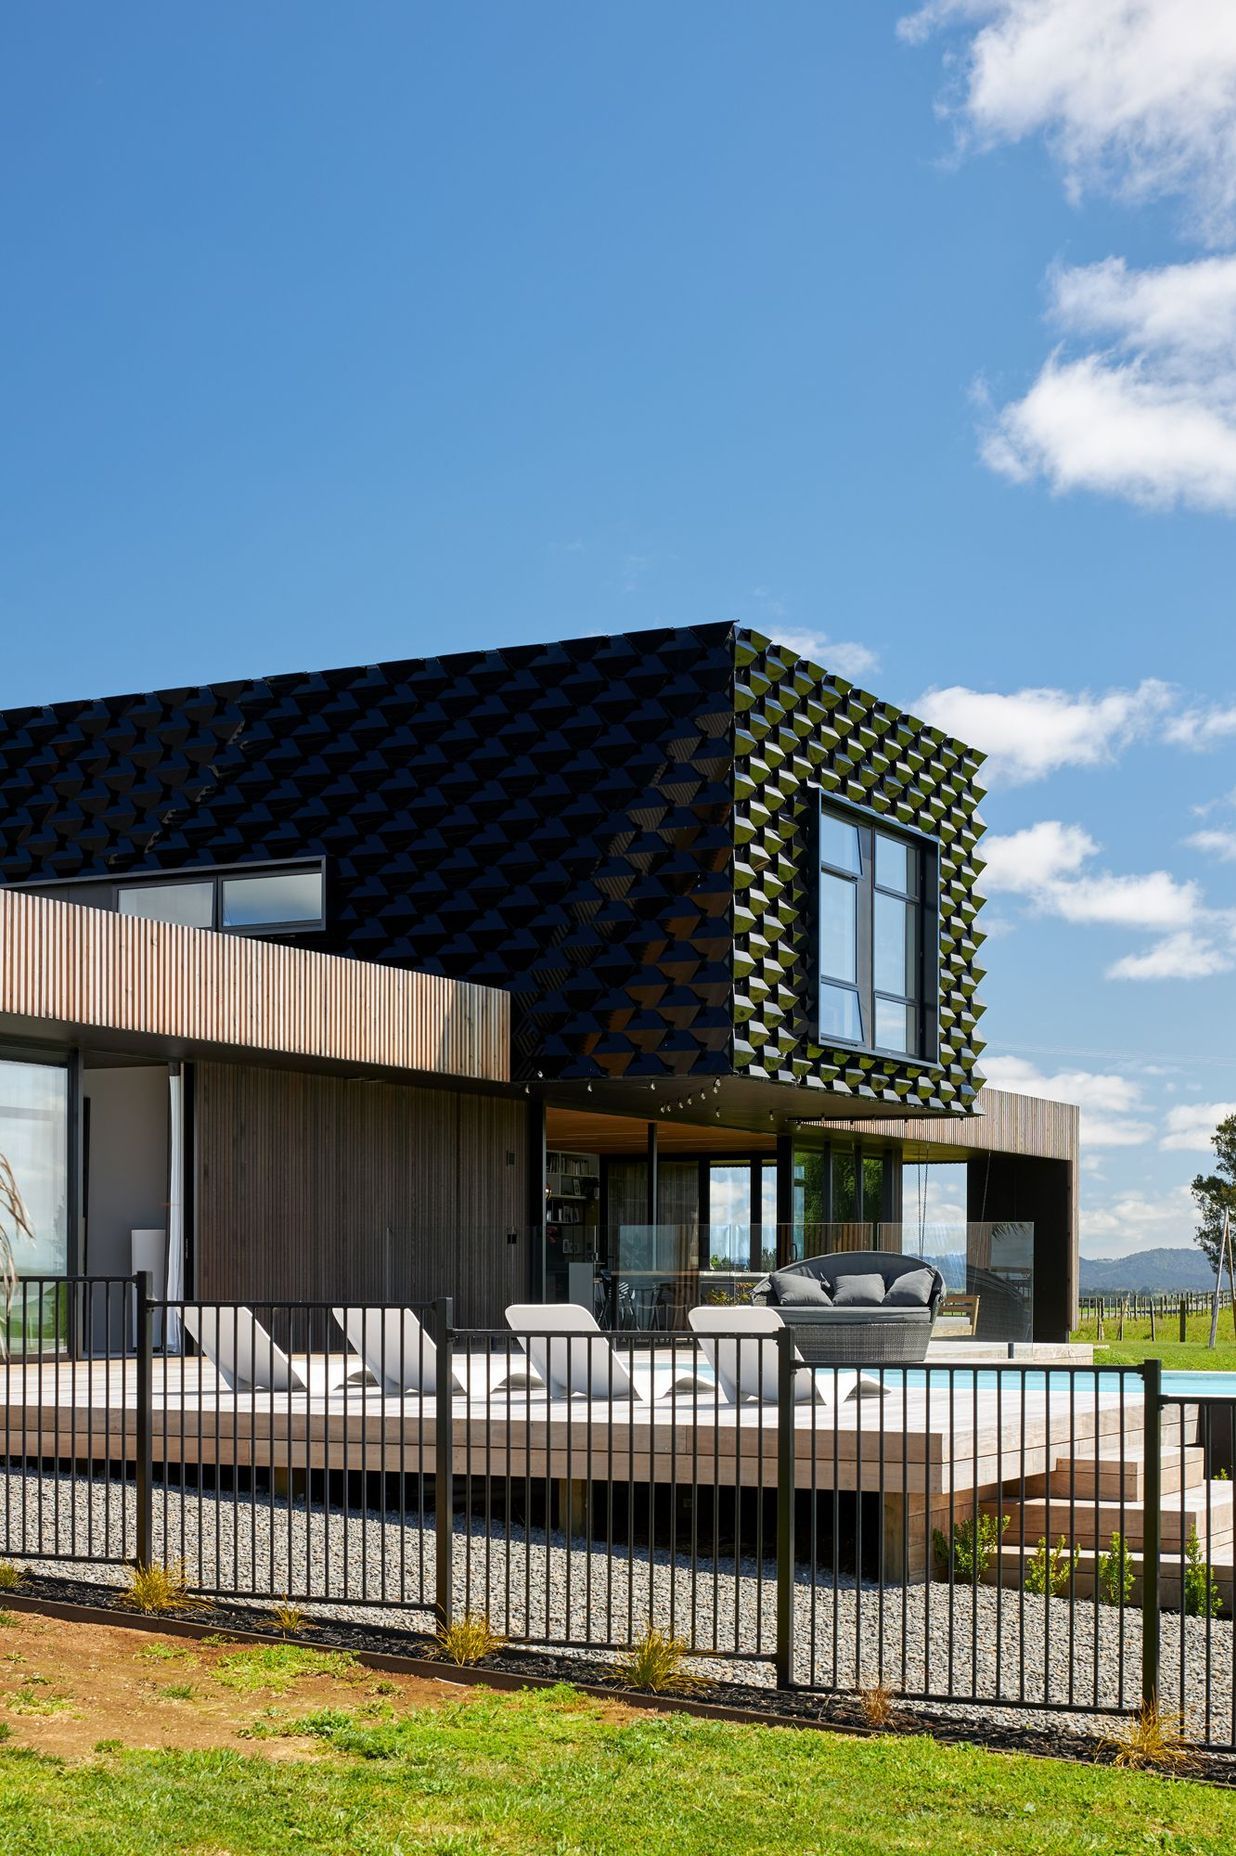 Metal 'scales' were developed to act as a solar shield for the upper level and to create contrast against the natural look of the larch cladding on the lower level.